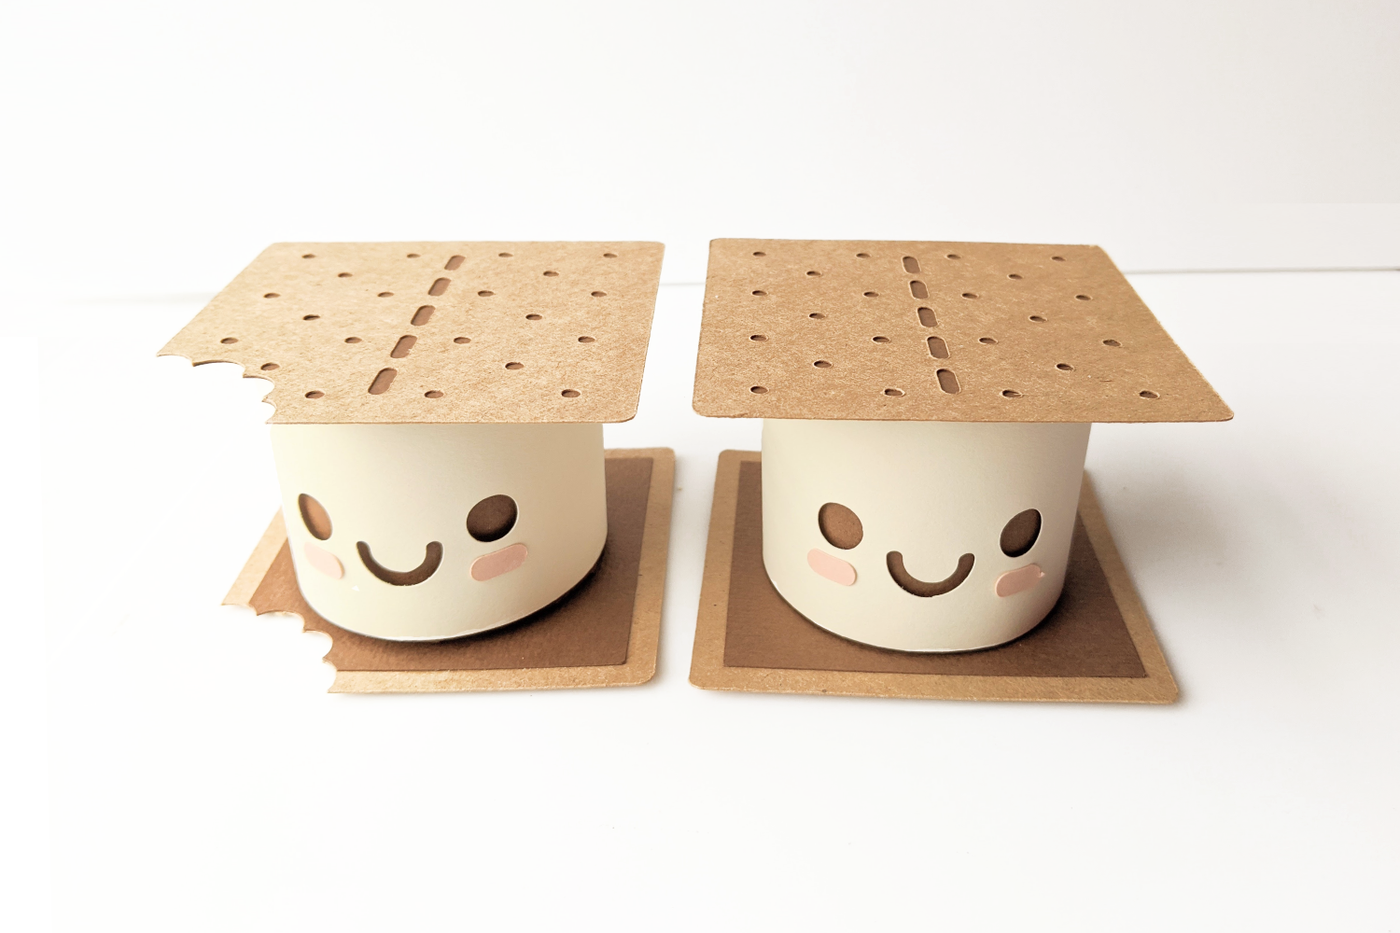 S'more shaped gift box design duo